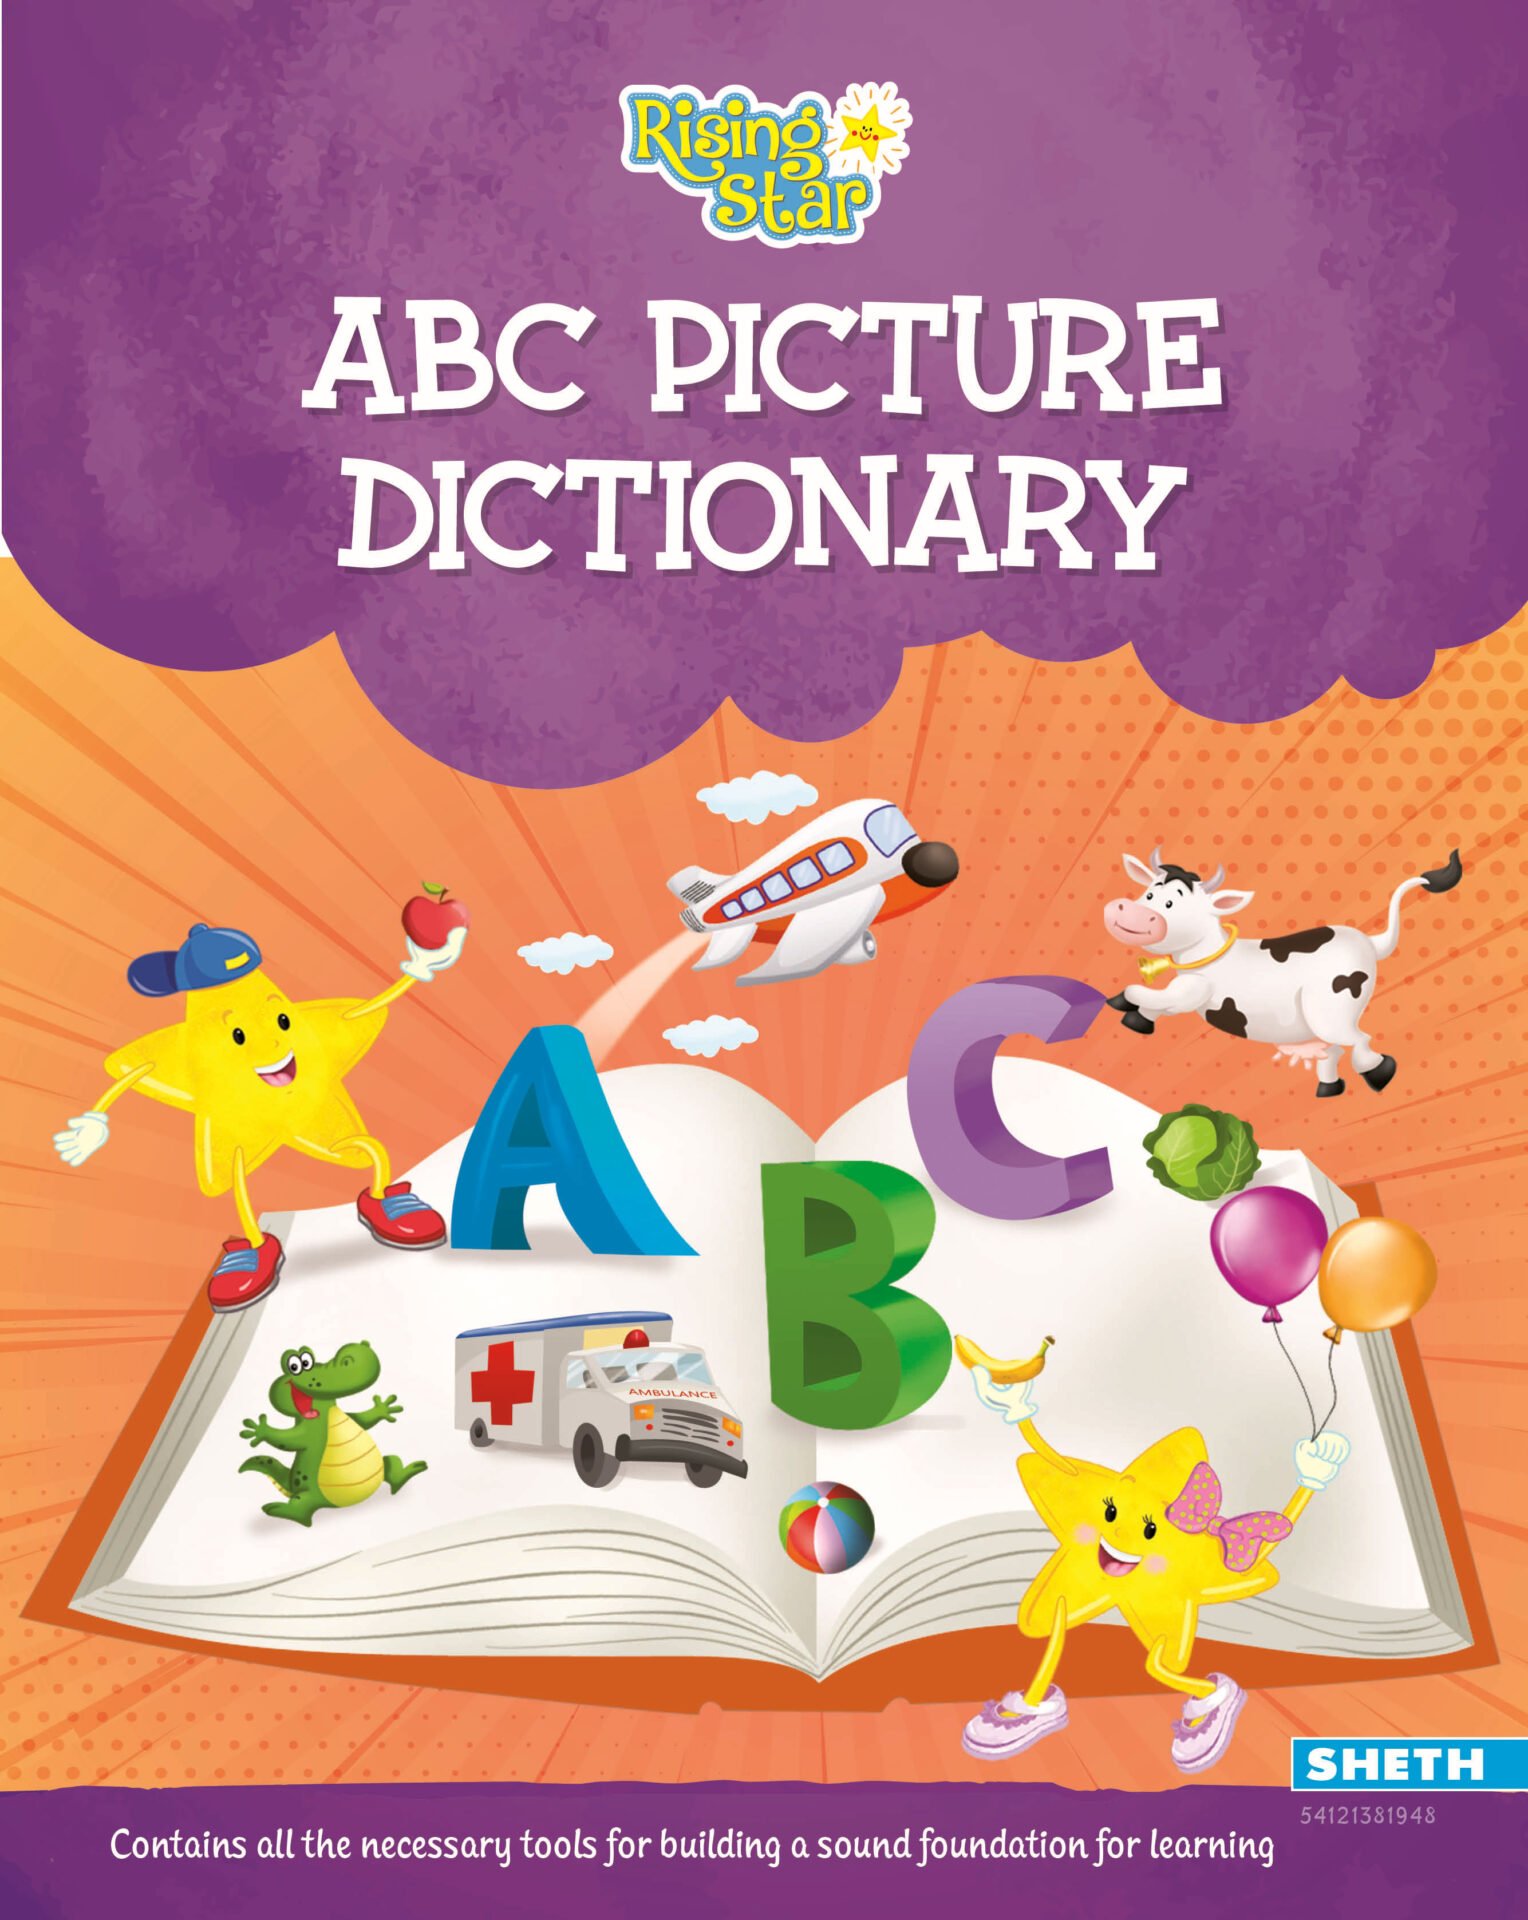 Rising Star ABC Picture Dictionary 01 1